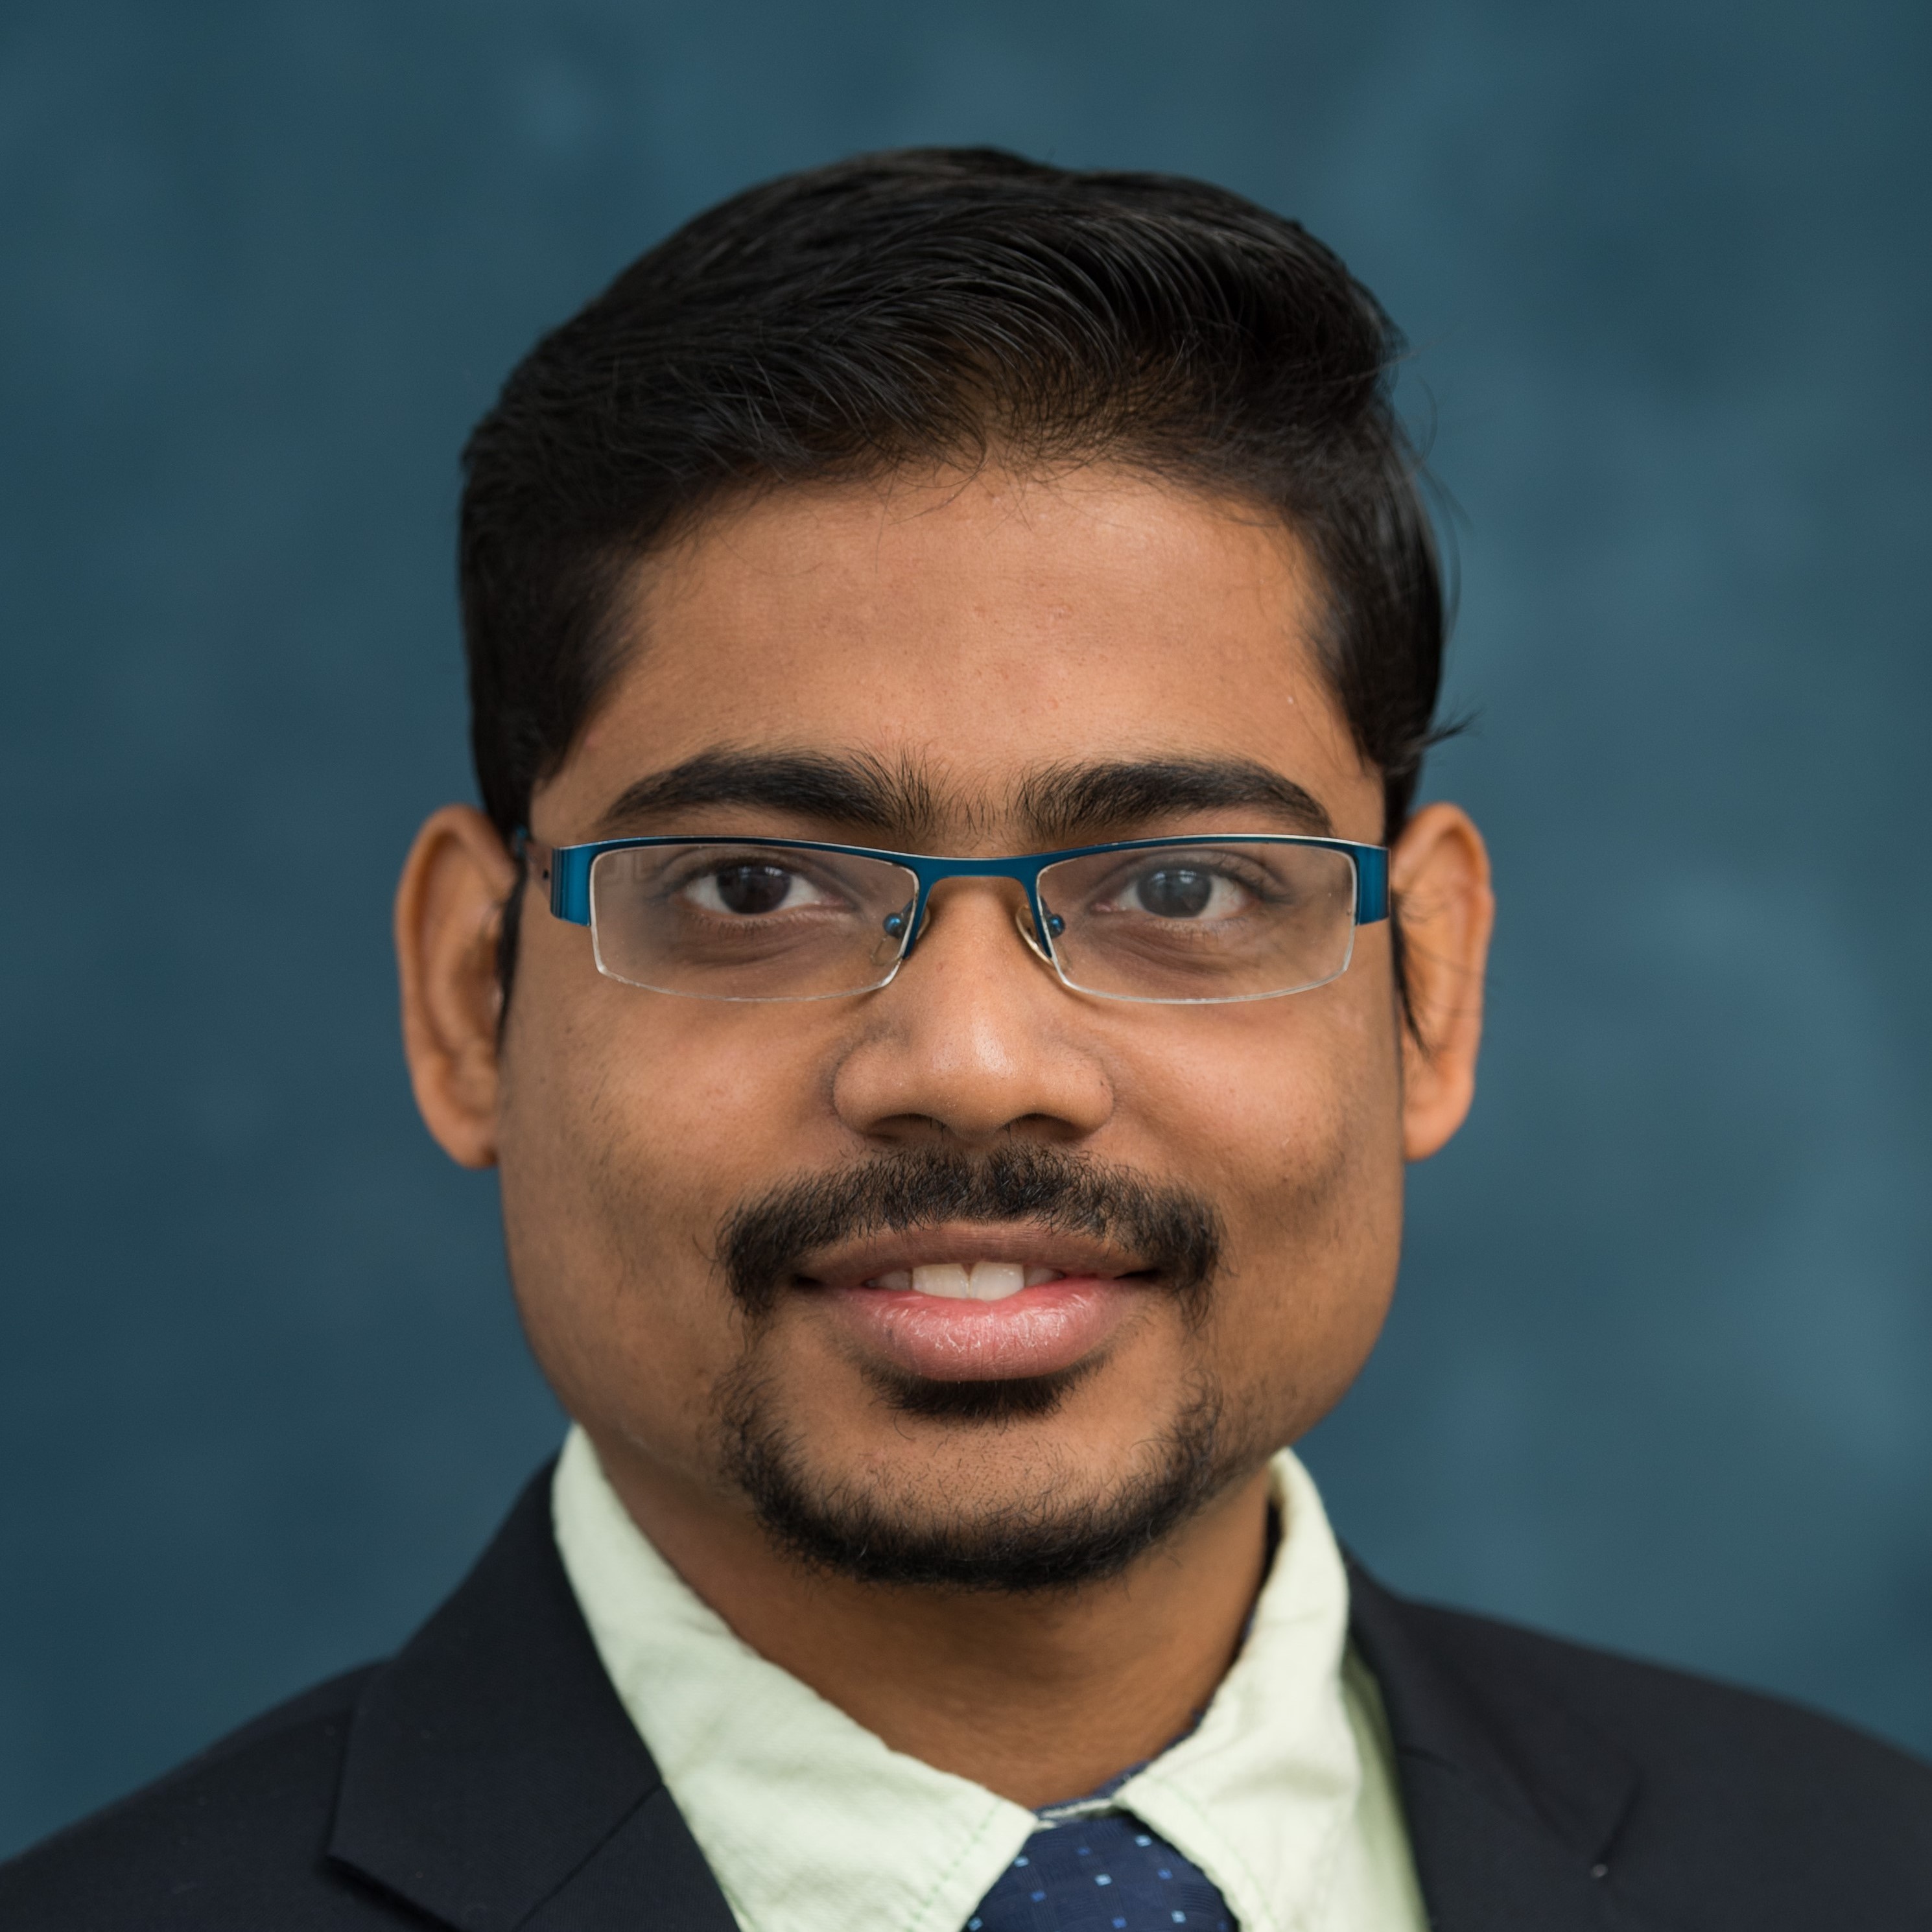 I am Suresh. In this headshot I’m wearing a green casual shirt and a dark blue blazer. I’m smiling at the camera